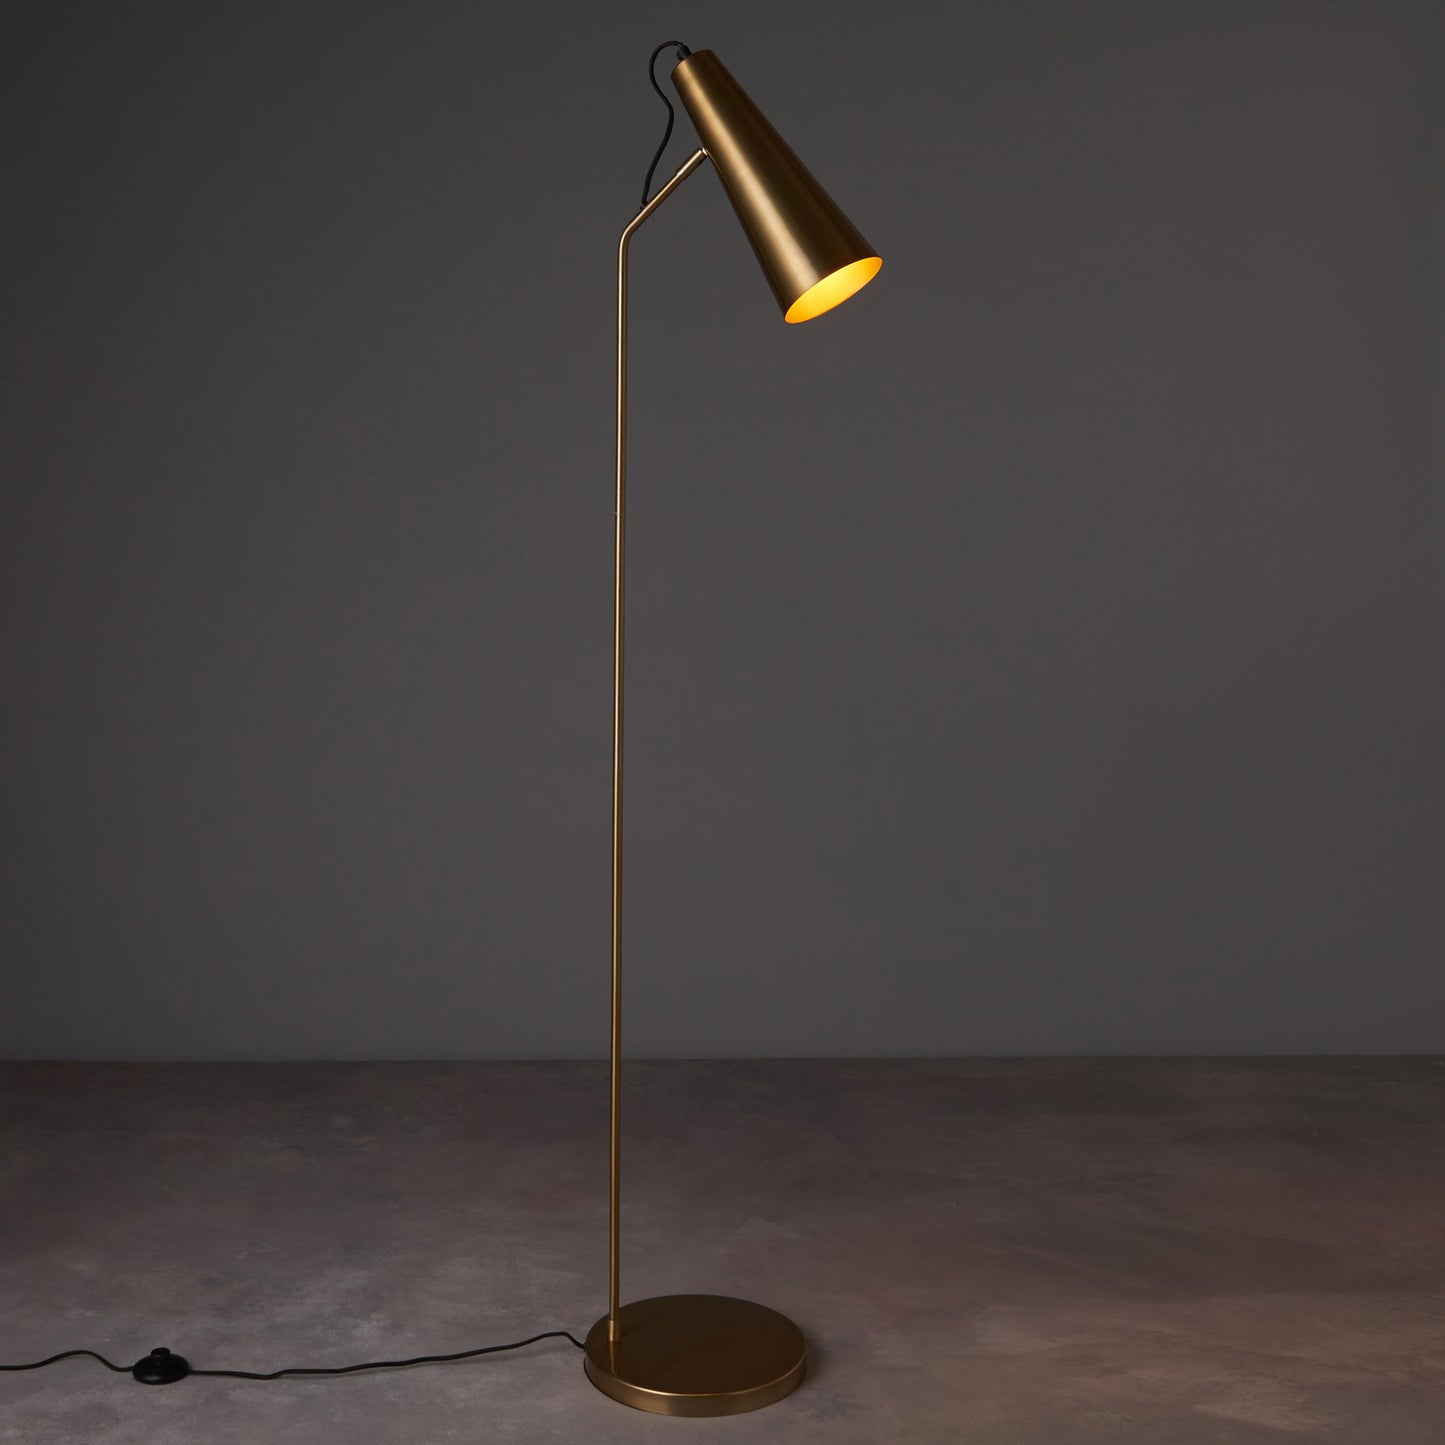 A Cross Floor Lamp by Kikiathome.co.uk enhances interior decor with its sleek design, displayed against a grey background.